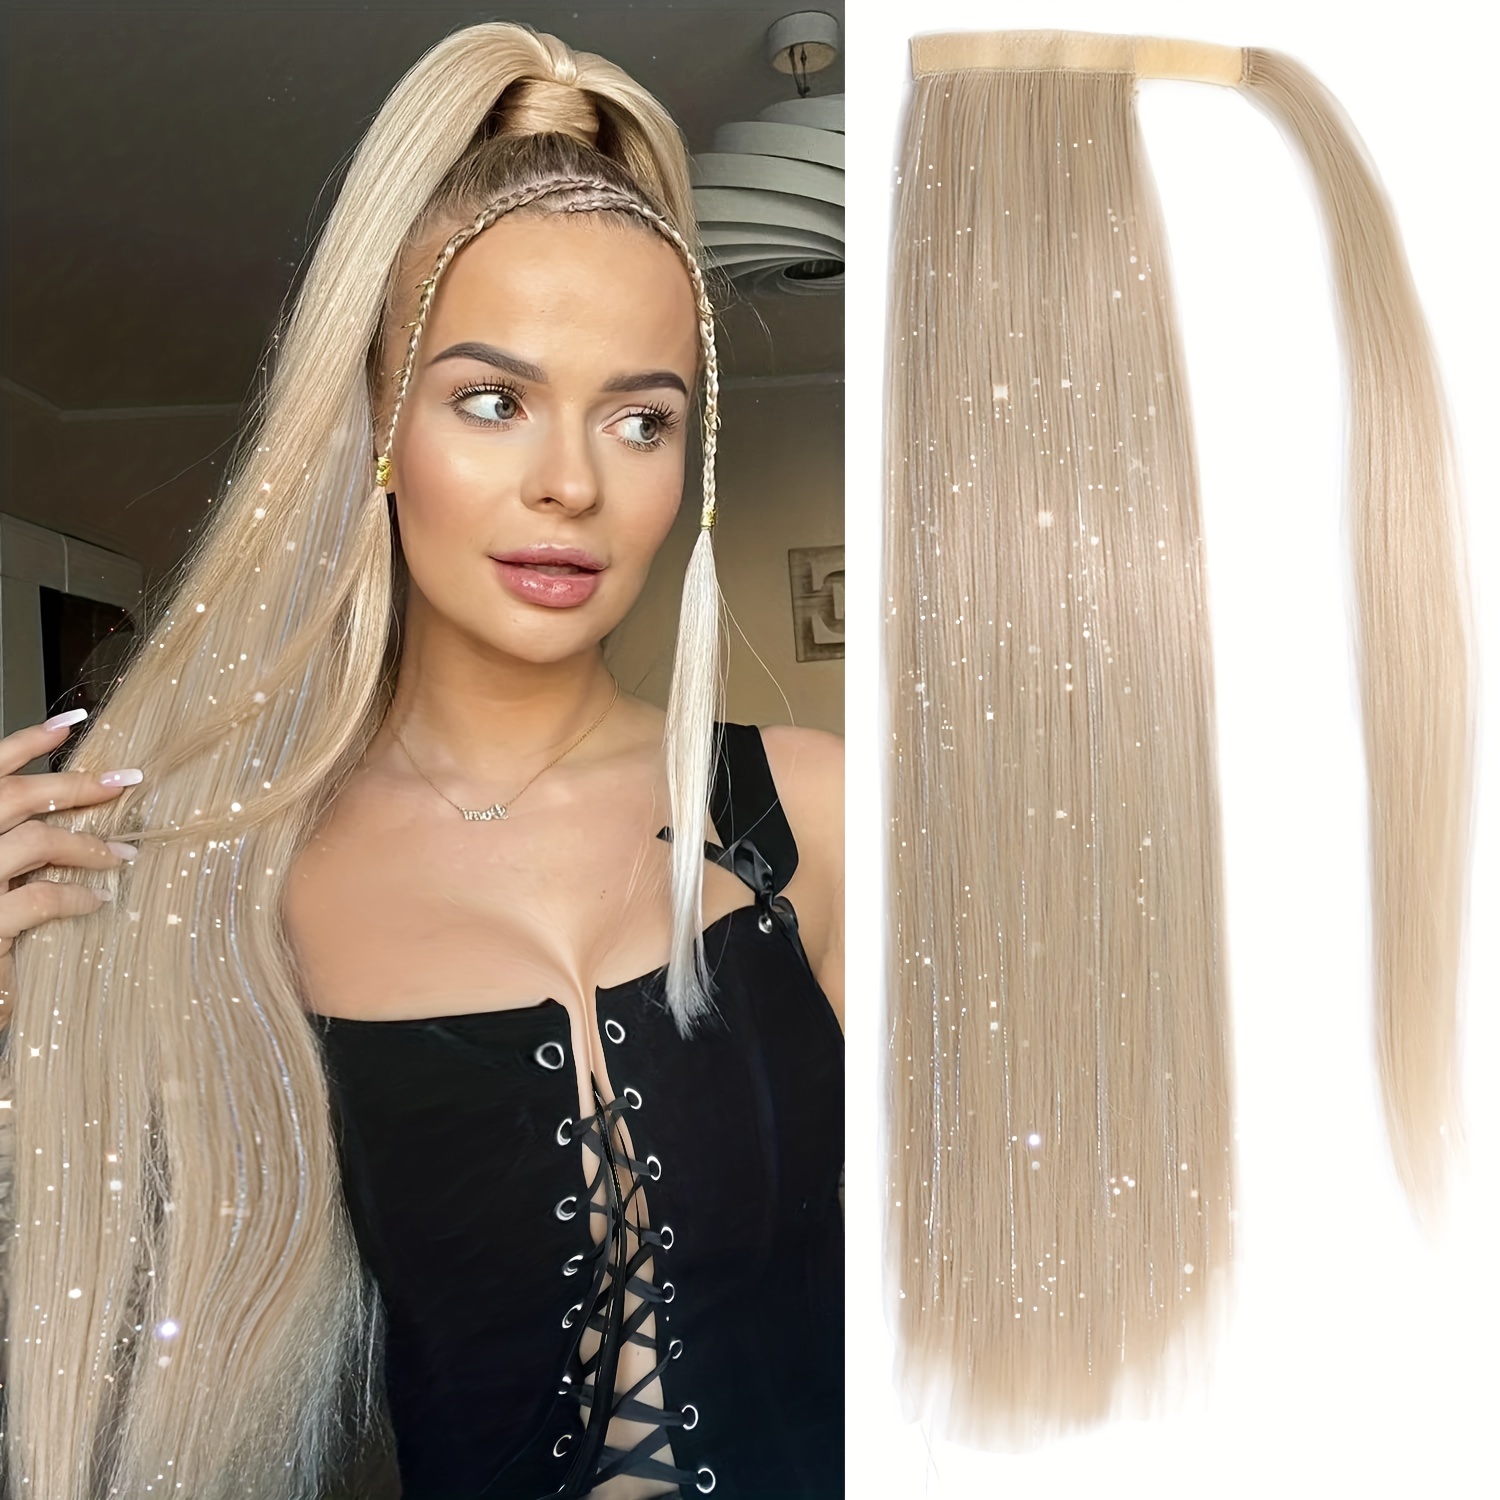 Wig Female Ponytail Wig Long Straight Hair Extension Piece